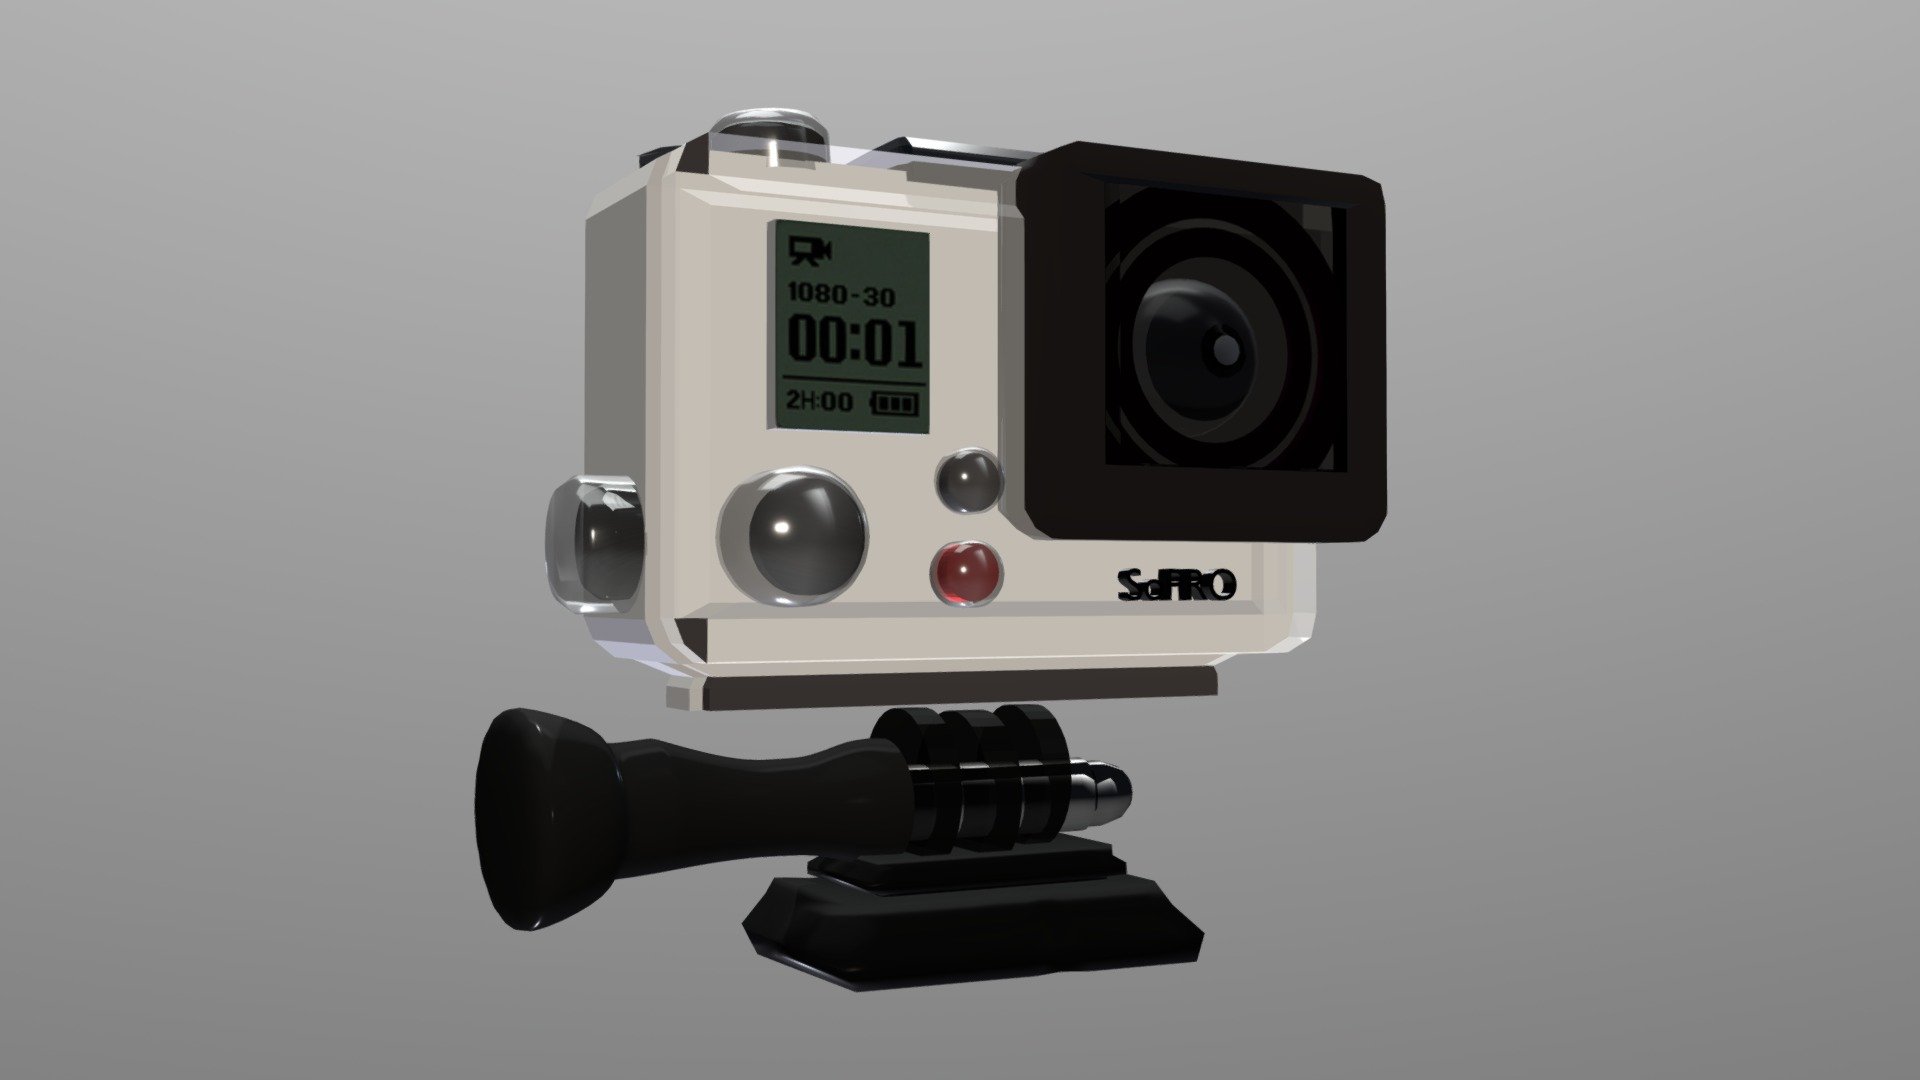 Reproduction of Hero3 GOPRO (renamed SOPRO).
Realized with Blender 3d model